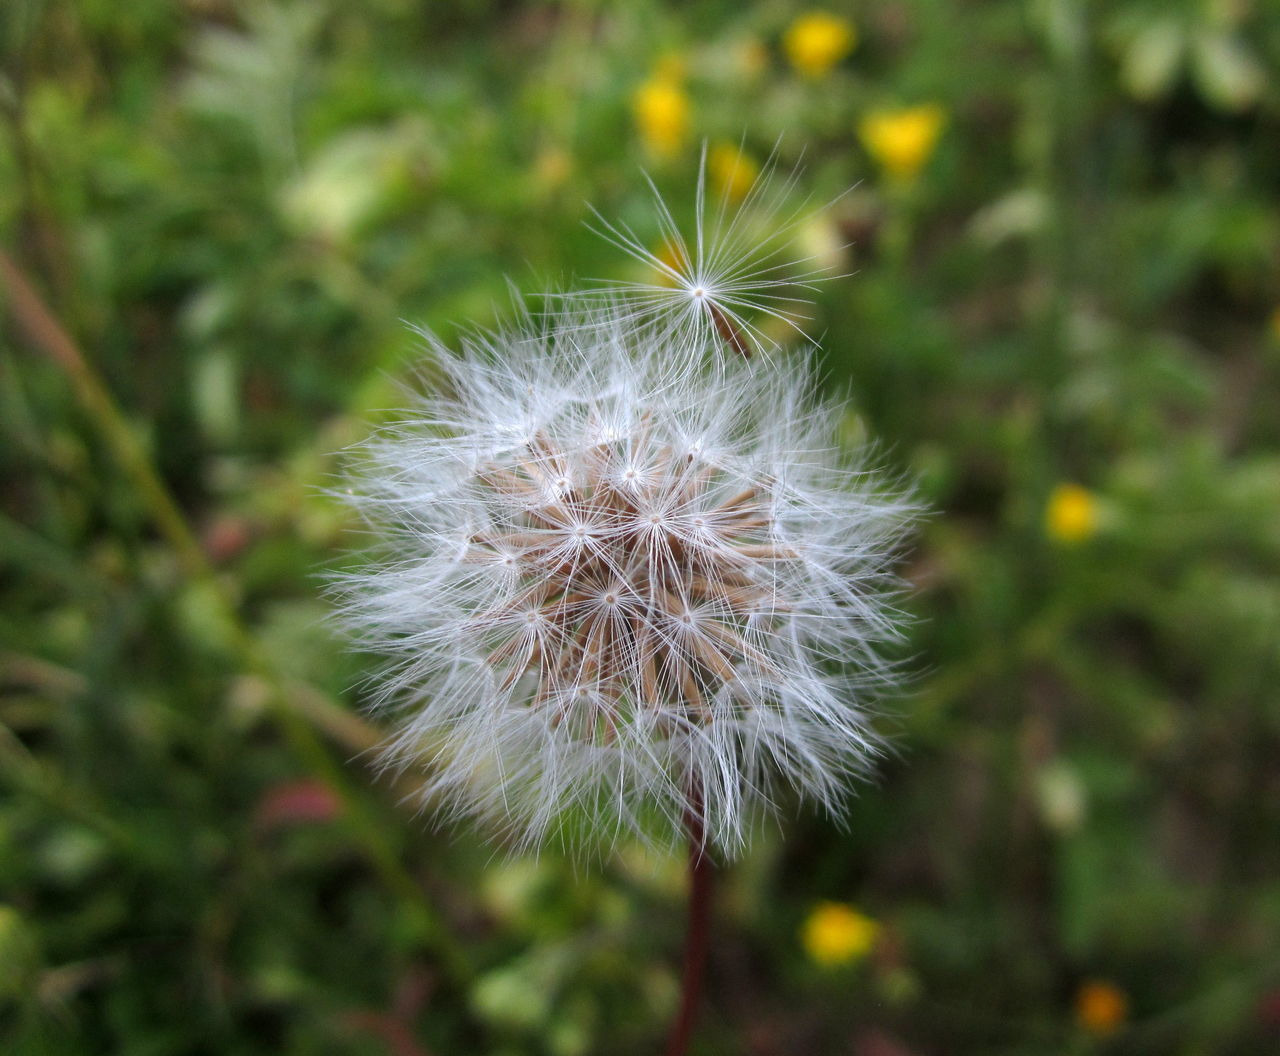 flower, plant, flowering plant, freshness, dandelion, beauty in nature, fragility, close-up, nature, no people, focus on foreground, growth, macro photography, flower head, wildflower, inflorescence, white, softness, grass, day, outdoors, thistle, dandelion seed, positive emotion, springtime, seed, tranquility